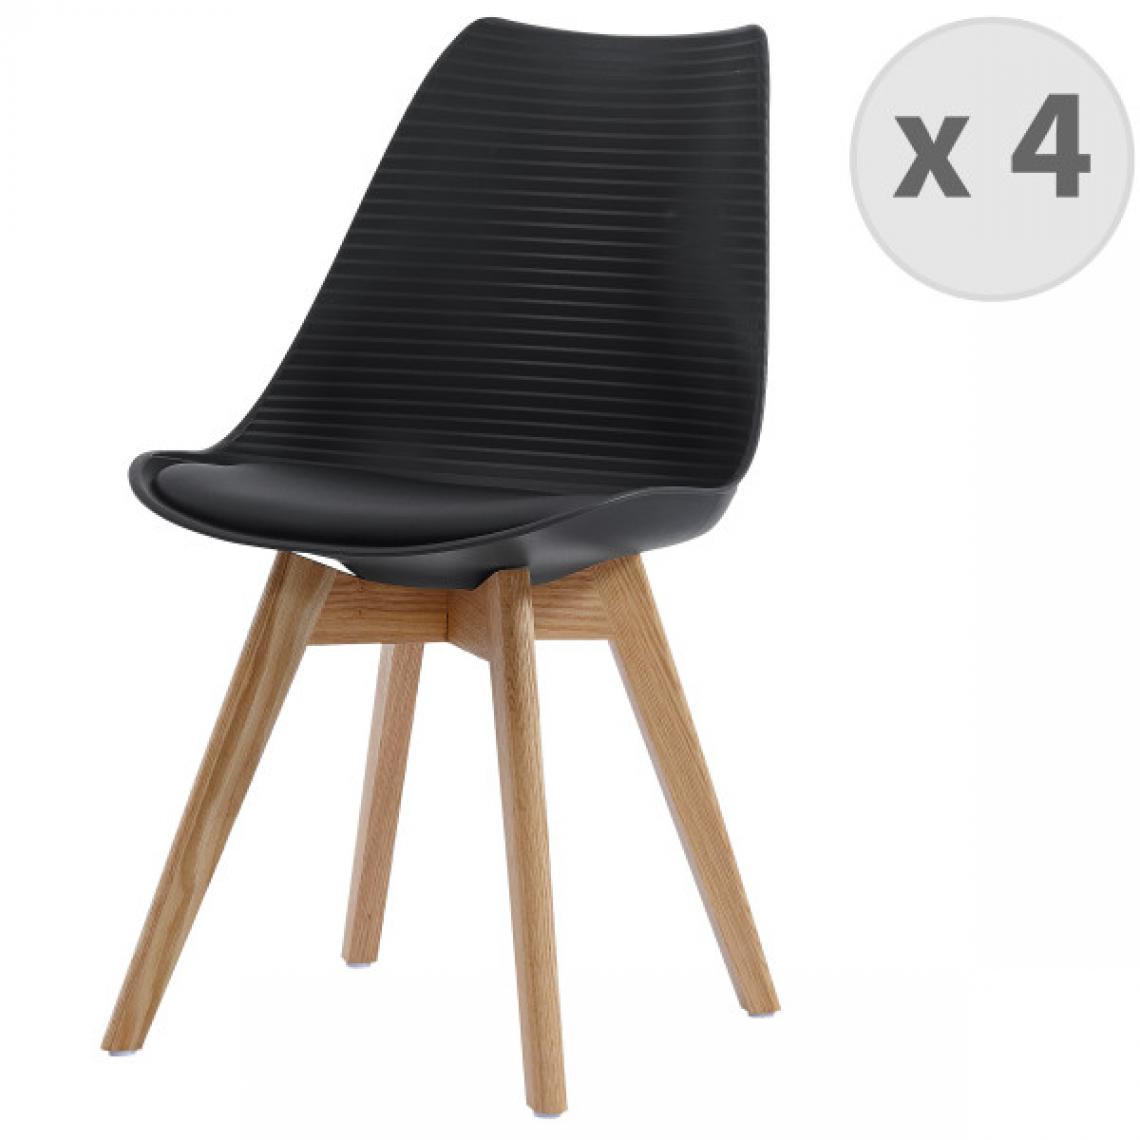 Moloo - BESSY-Chaise scandinave noir pieds chêne (x4) - Chaises